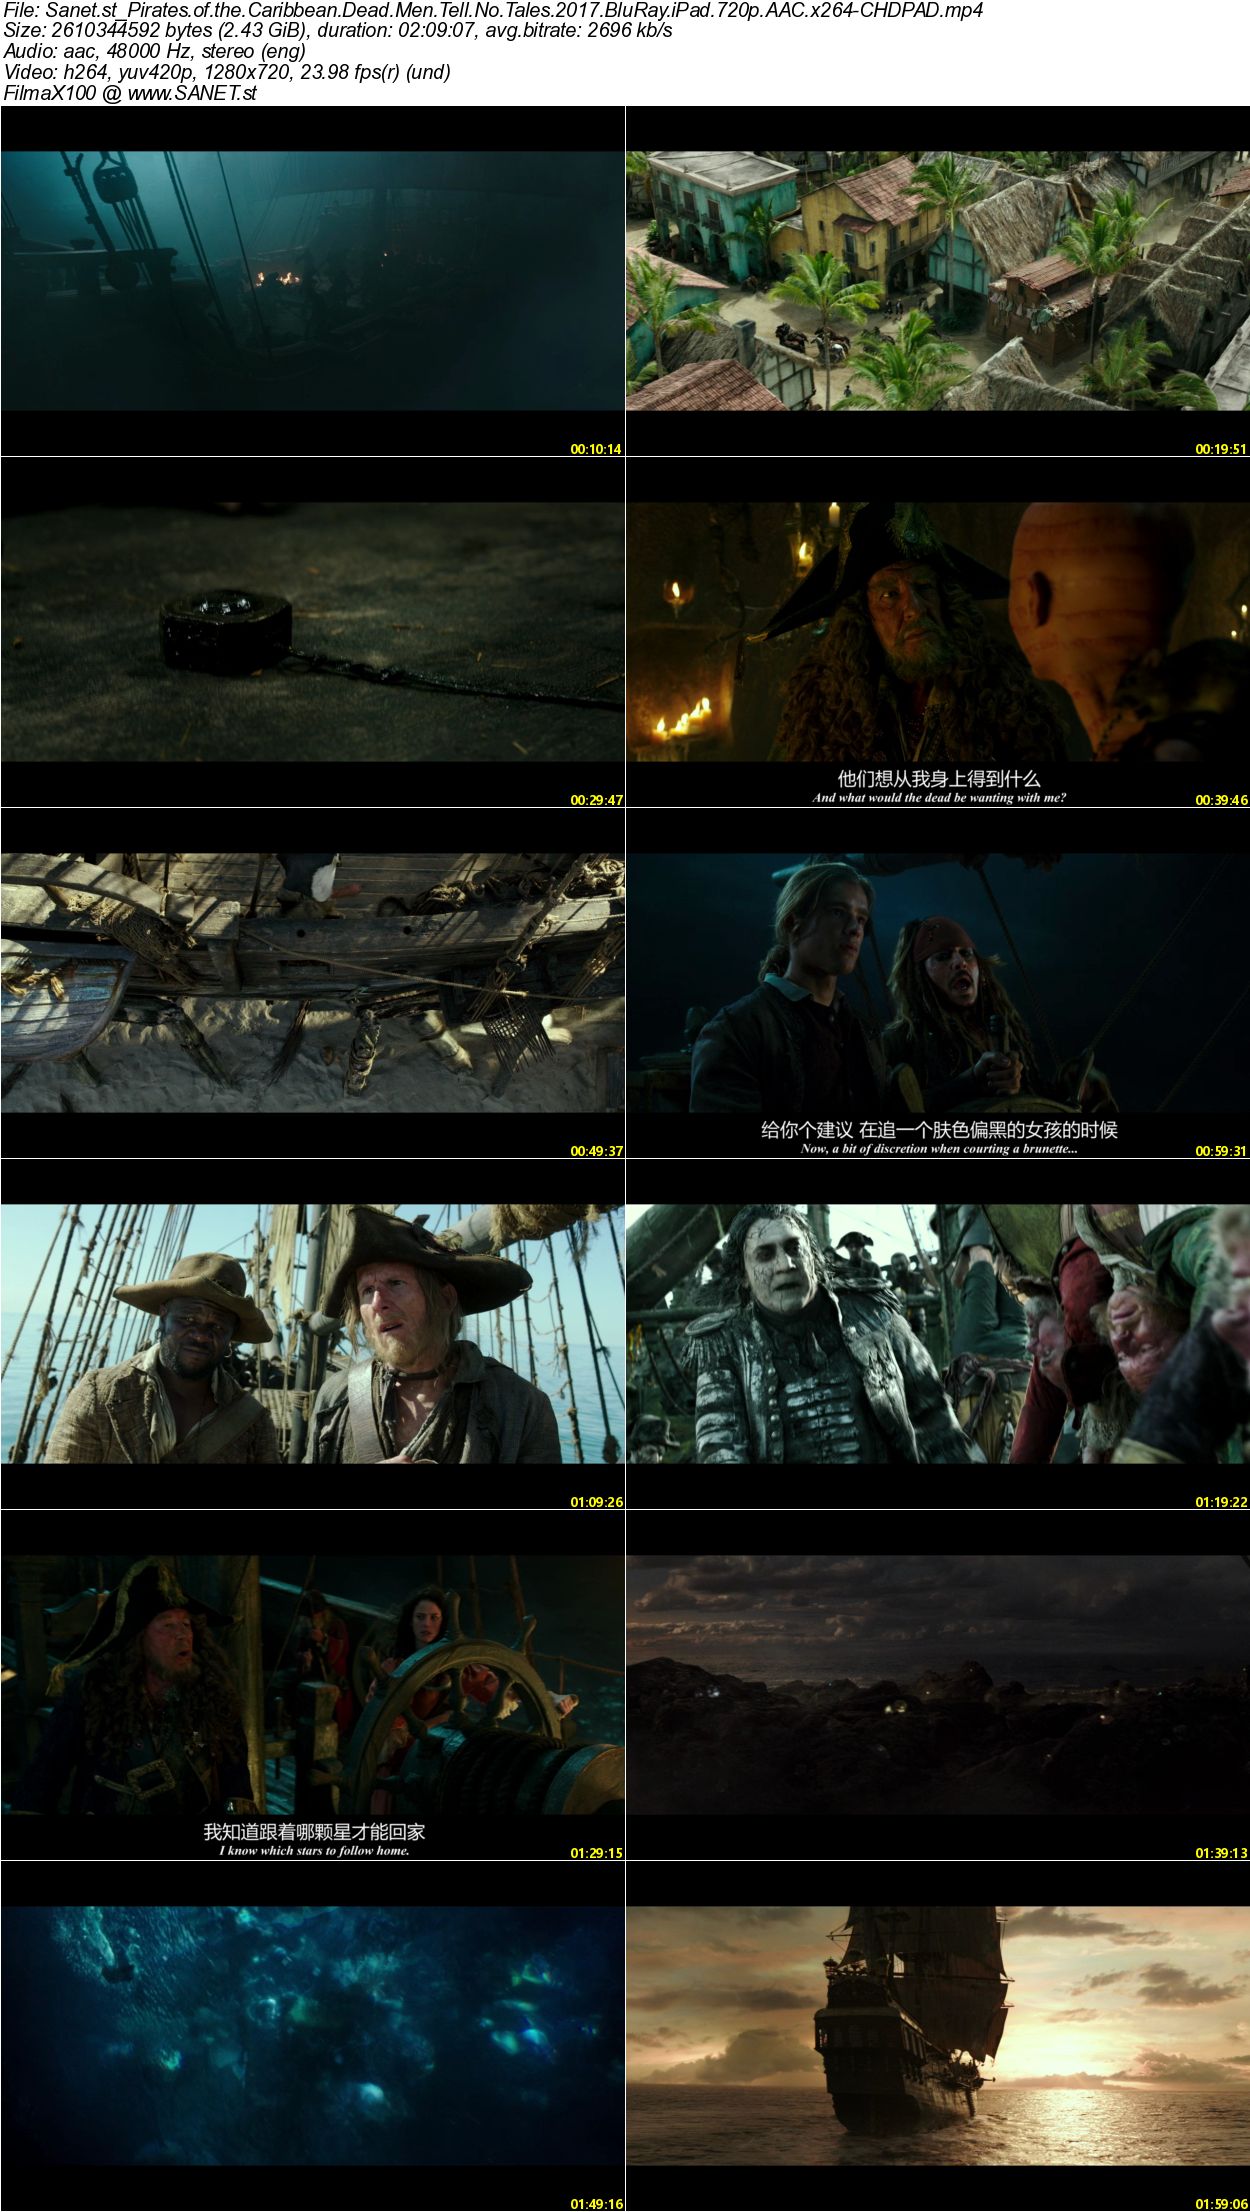 Pirates of the Caribbean: Dead Man’s download the new version for iphone